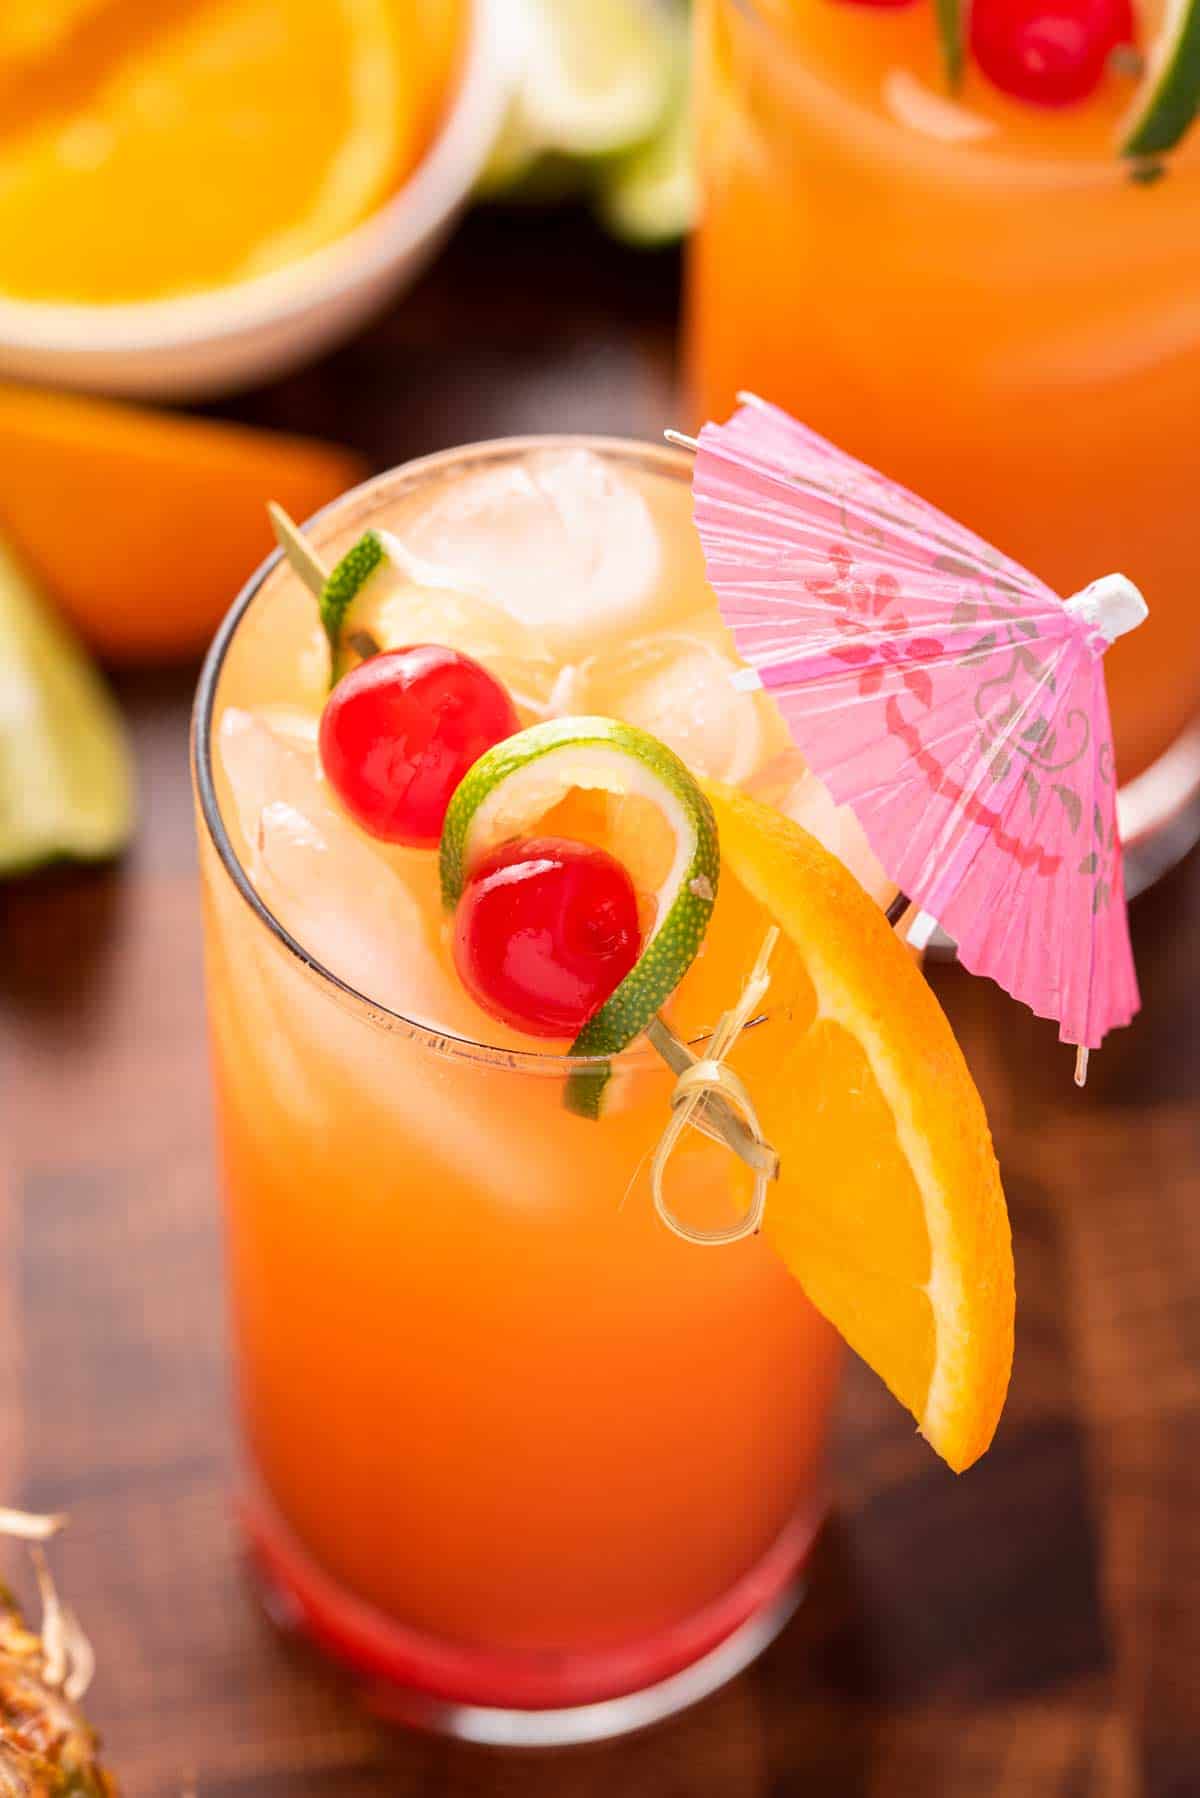 Tropical Rum Punch - The Chunky Chef